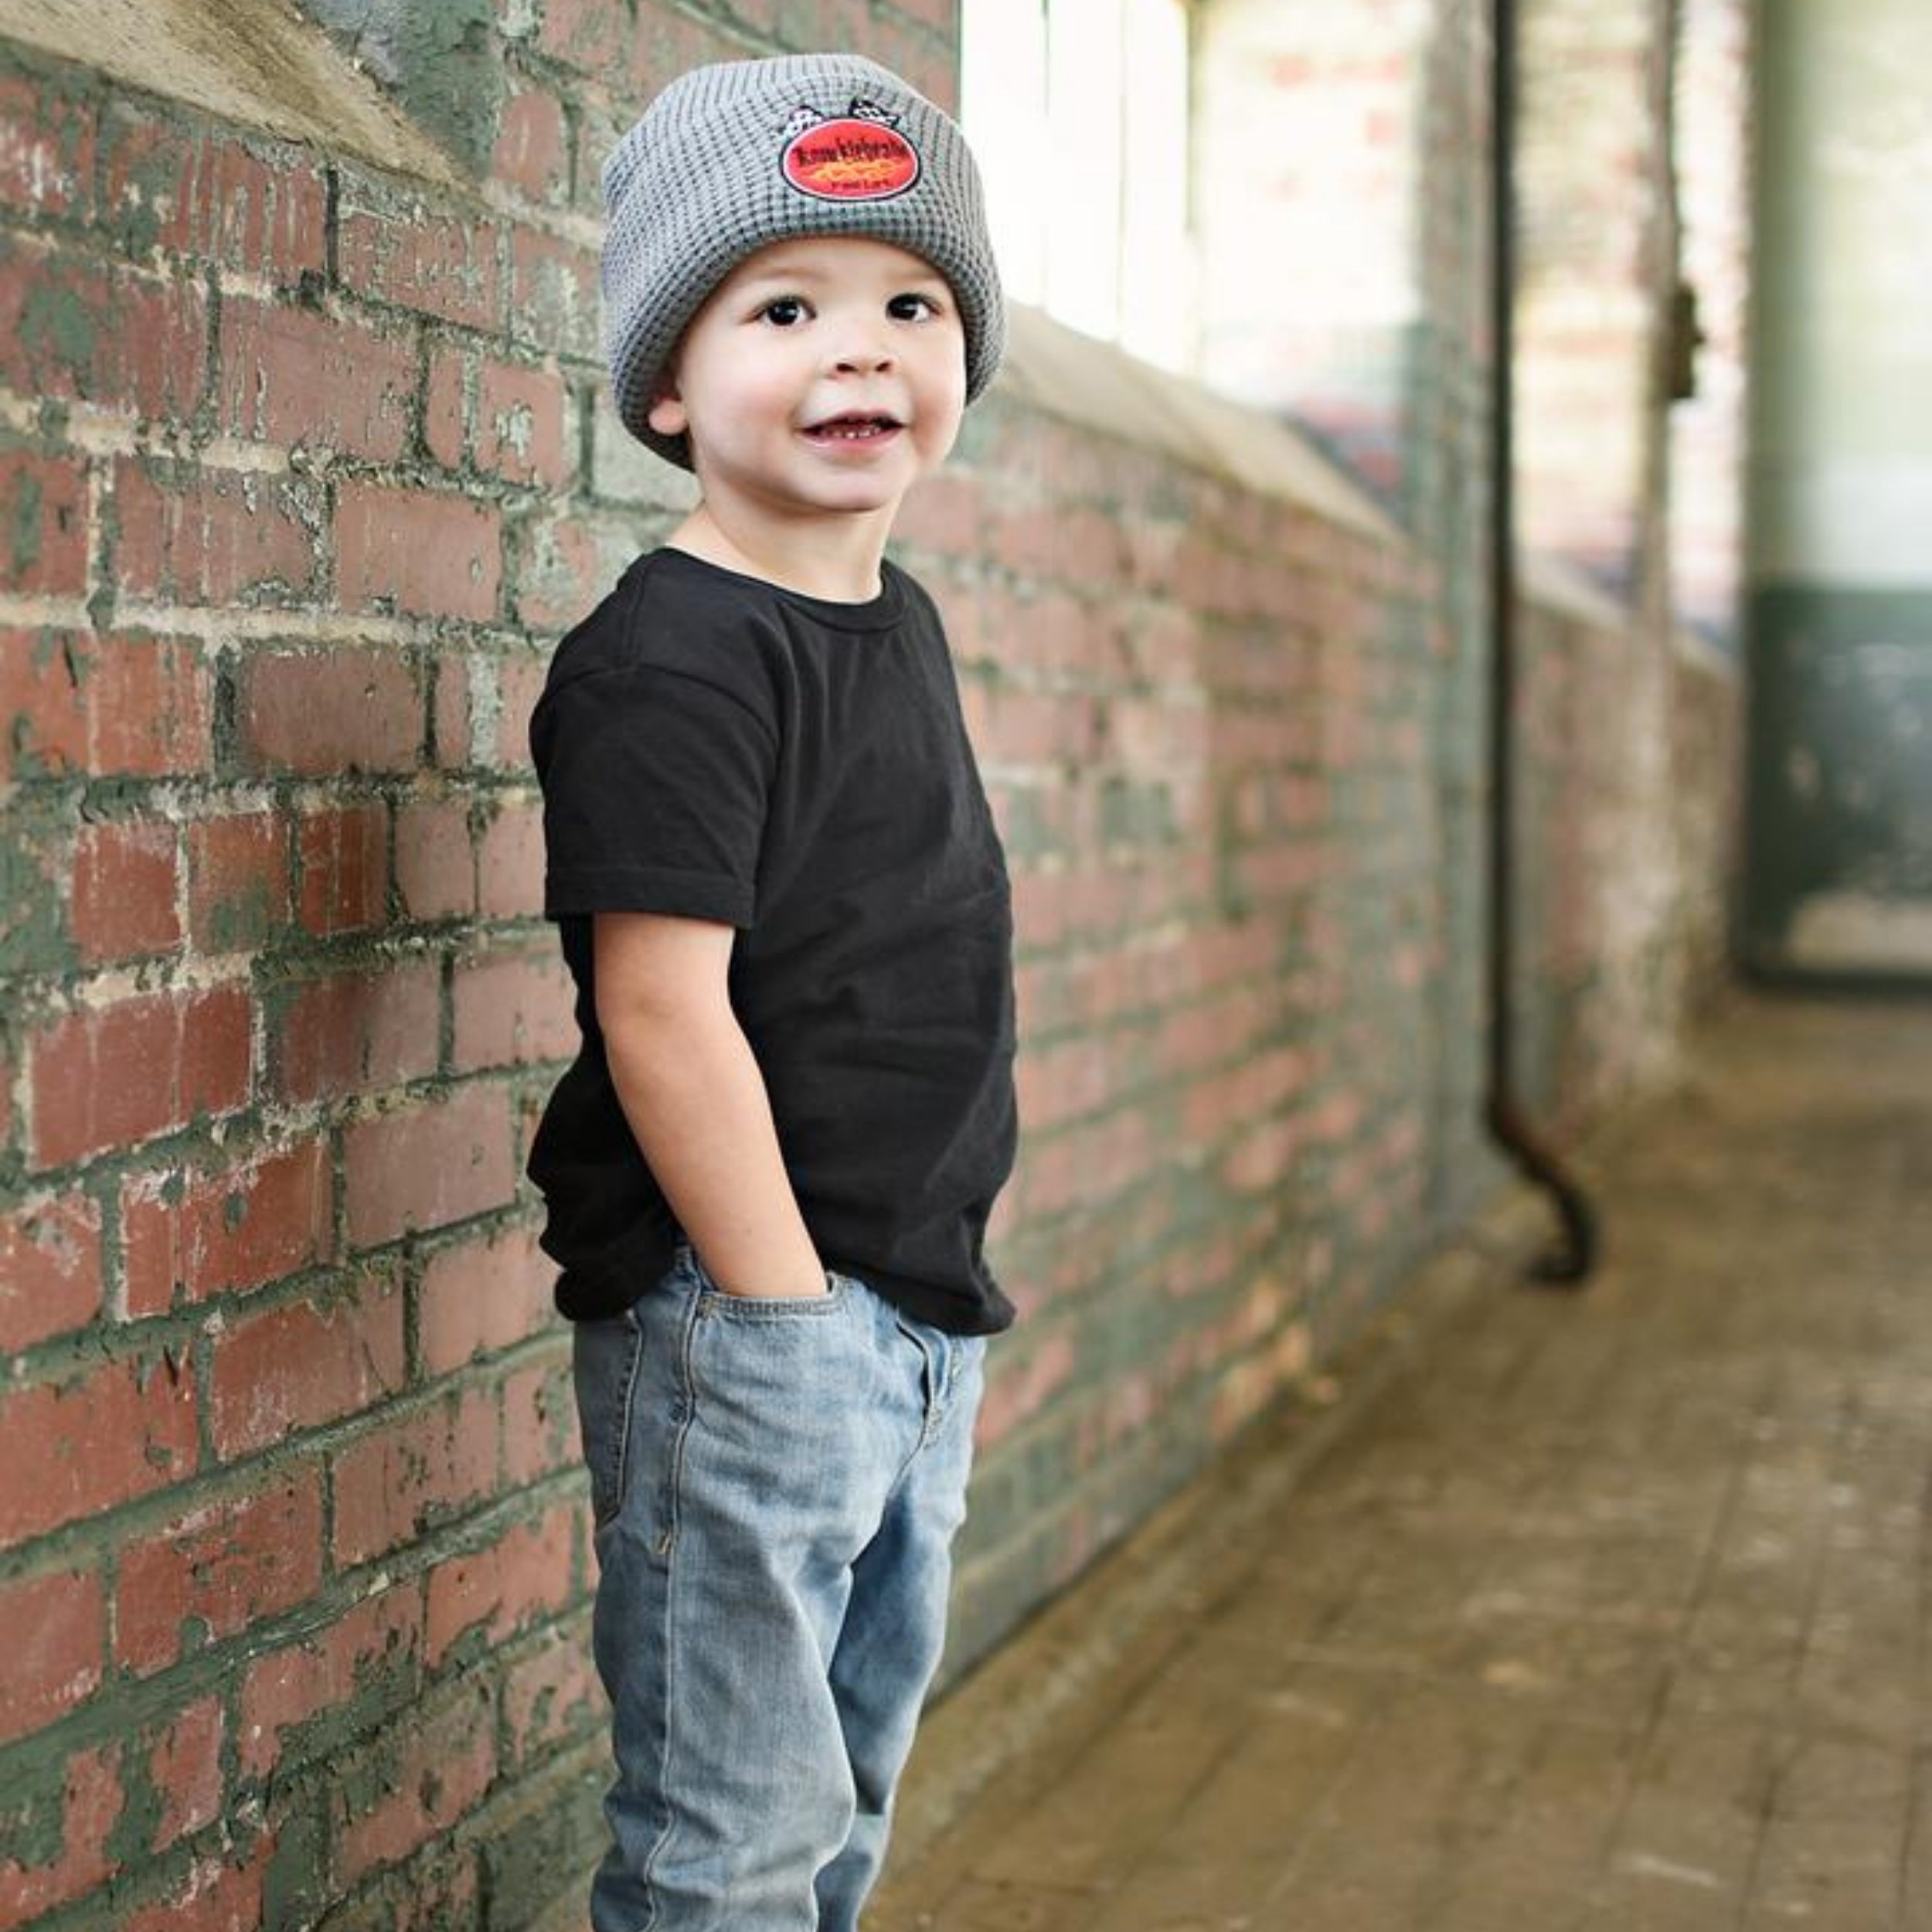 Toddler, Infant, And Baby Hats And Apparel – Binkybro